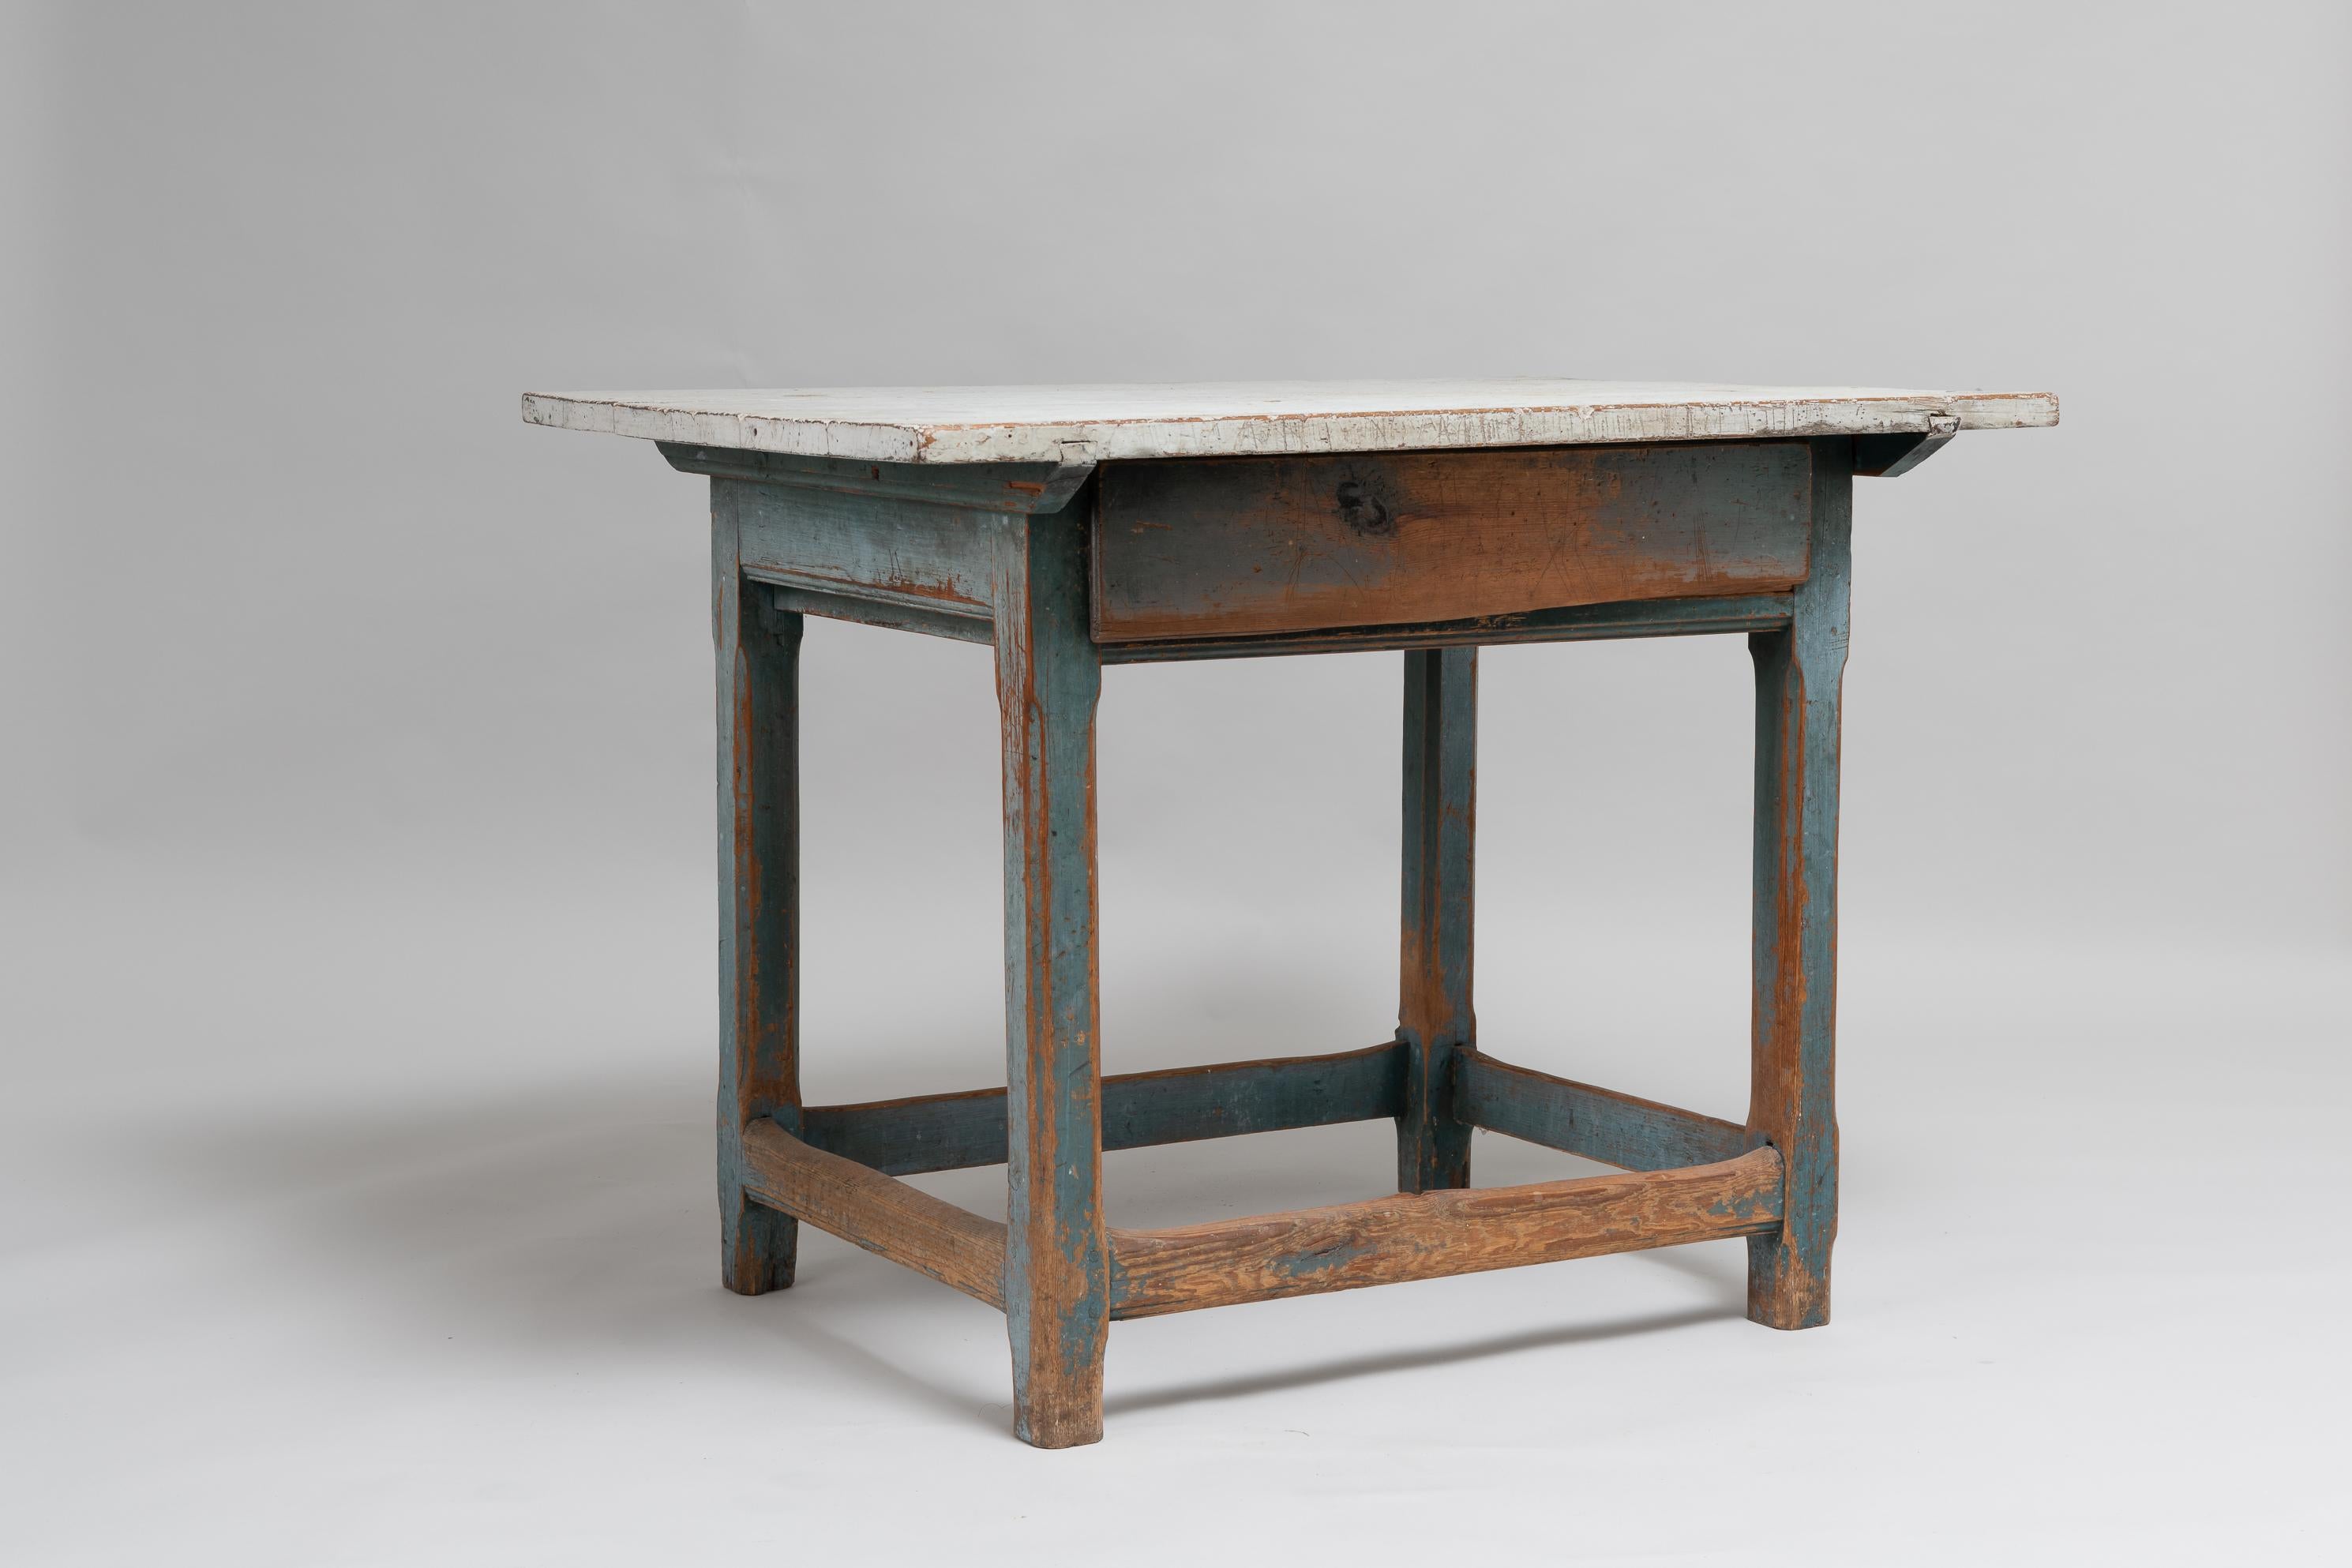 18th Century Swedish Genuine Baroque Country Table In Good Condition For Sale In Kramfors, SE